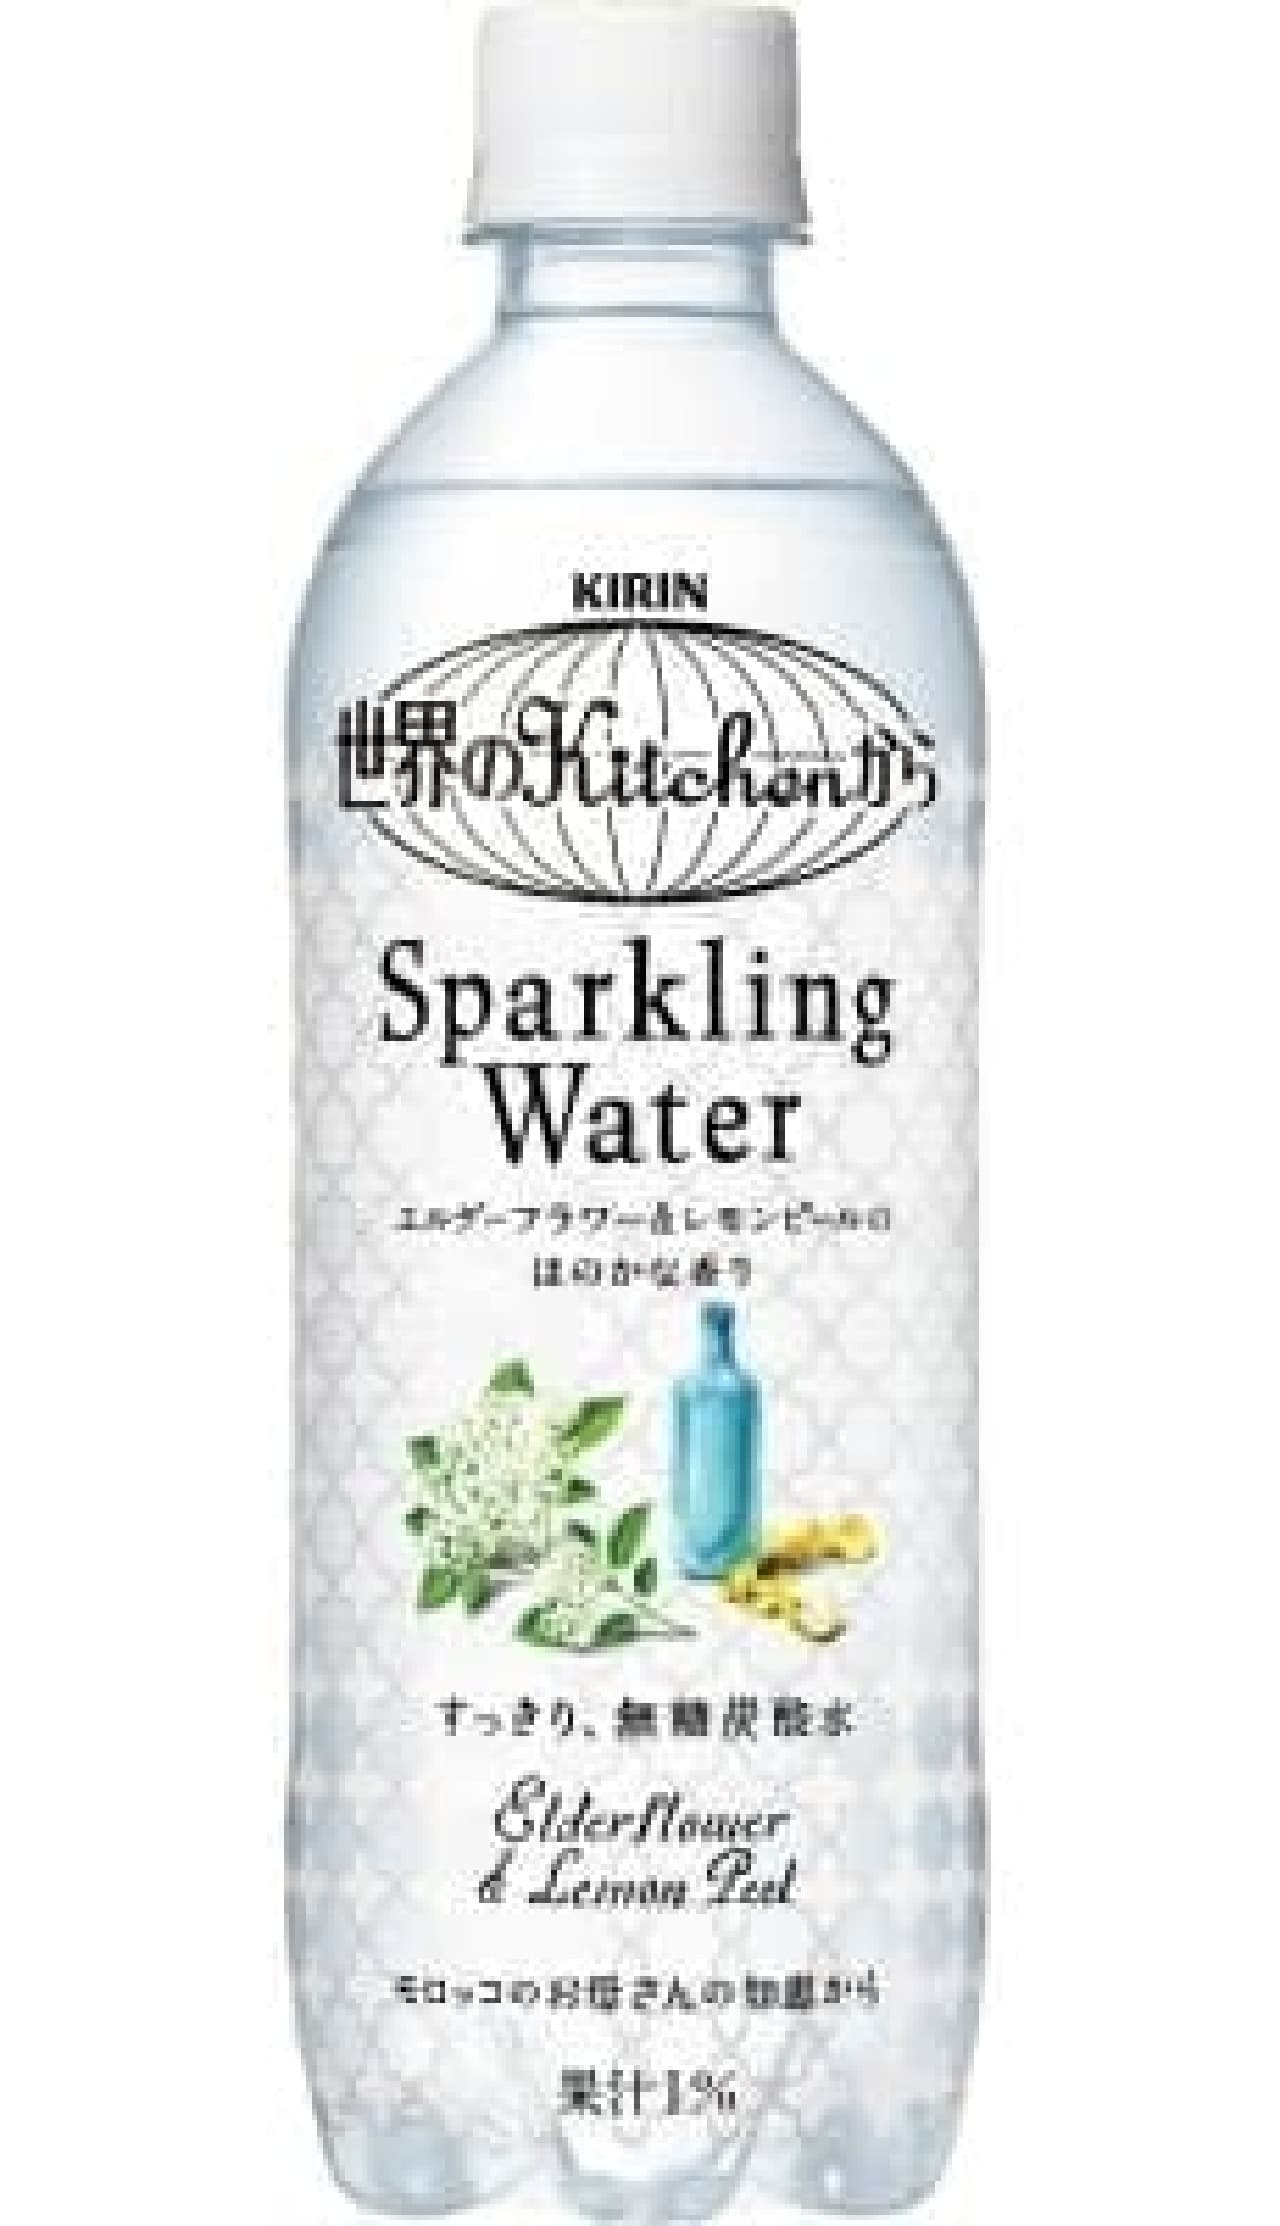 "Carbonated water to taste flowers" is now available from Kitchens around the world